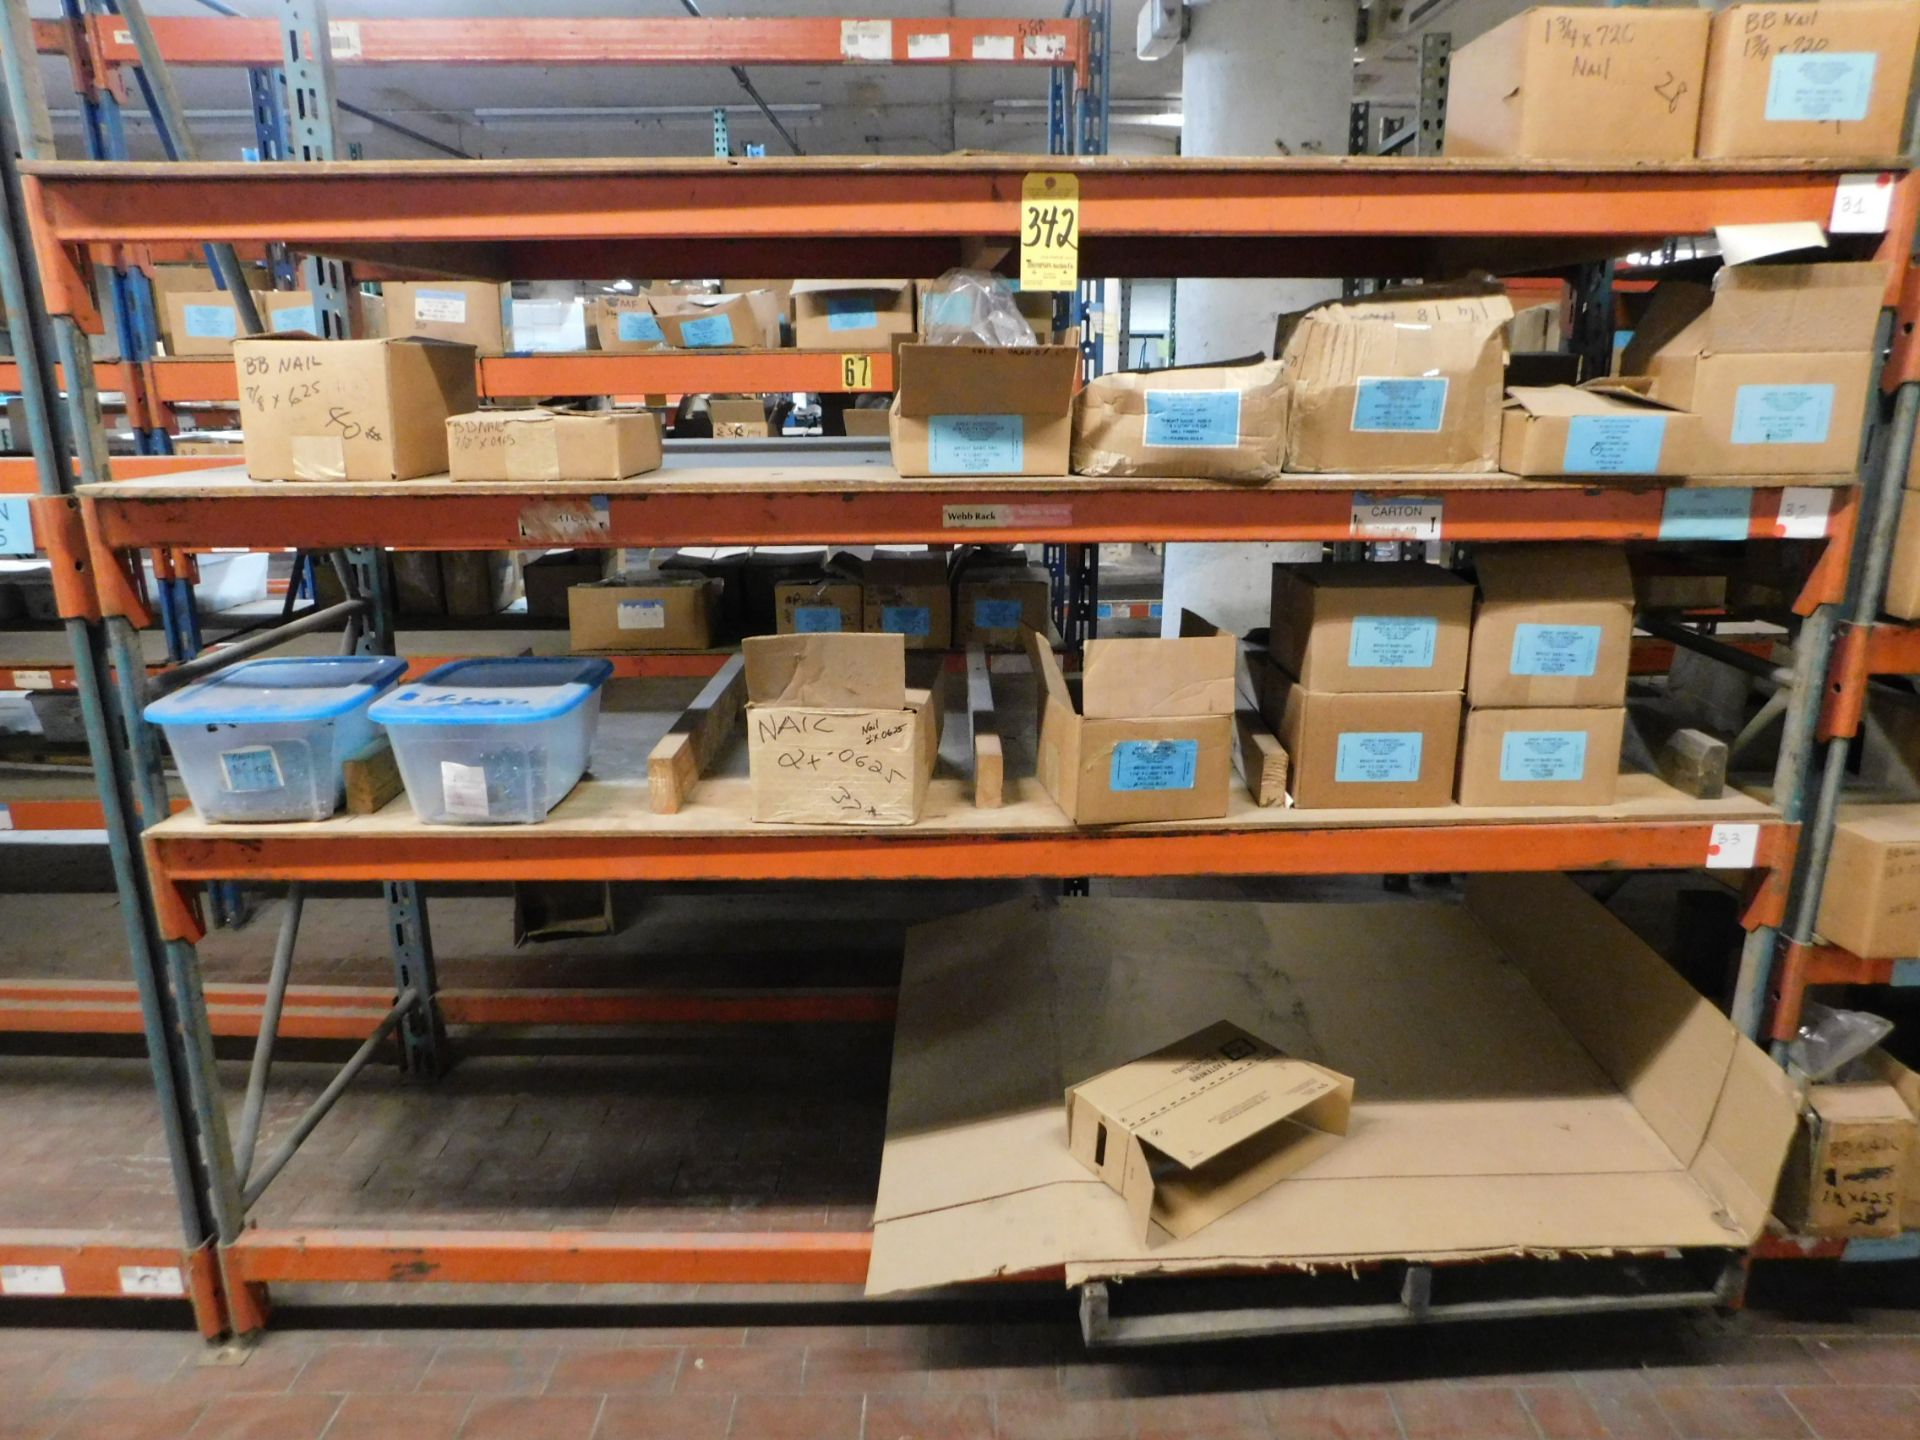 Contents of (1) Section of Pallet Shelving (Nail Inventory)